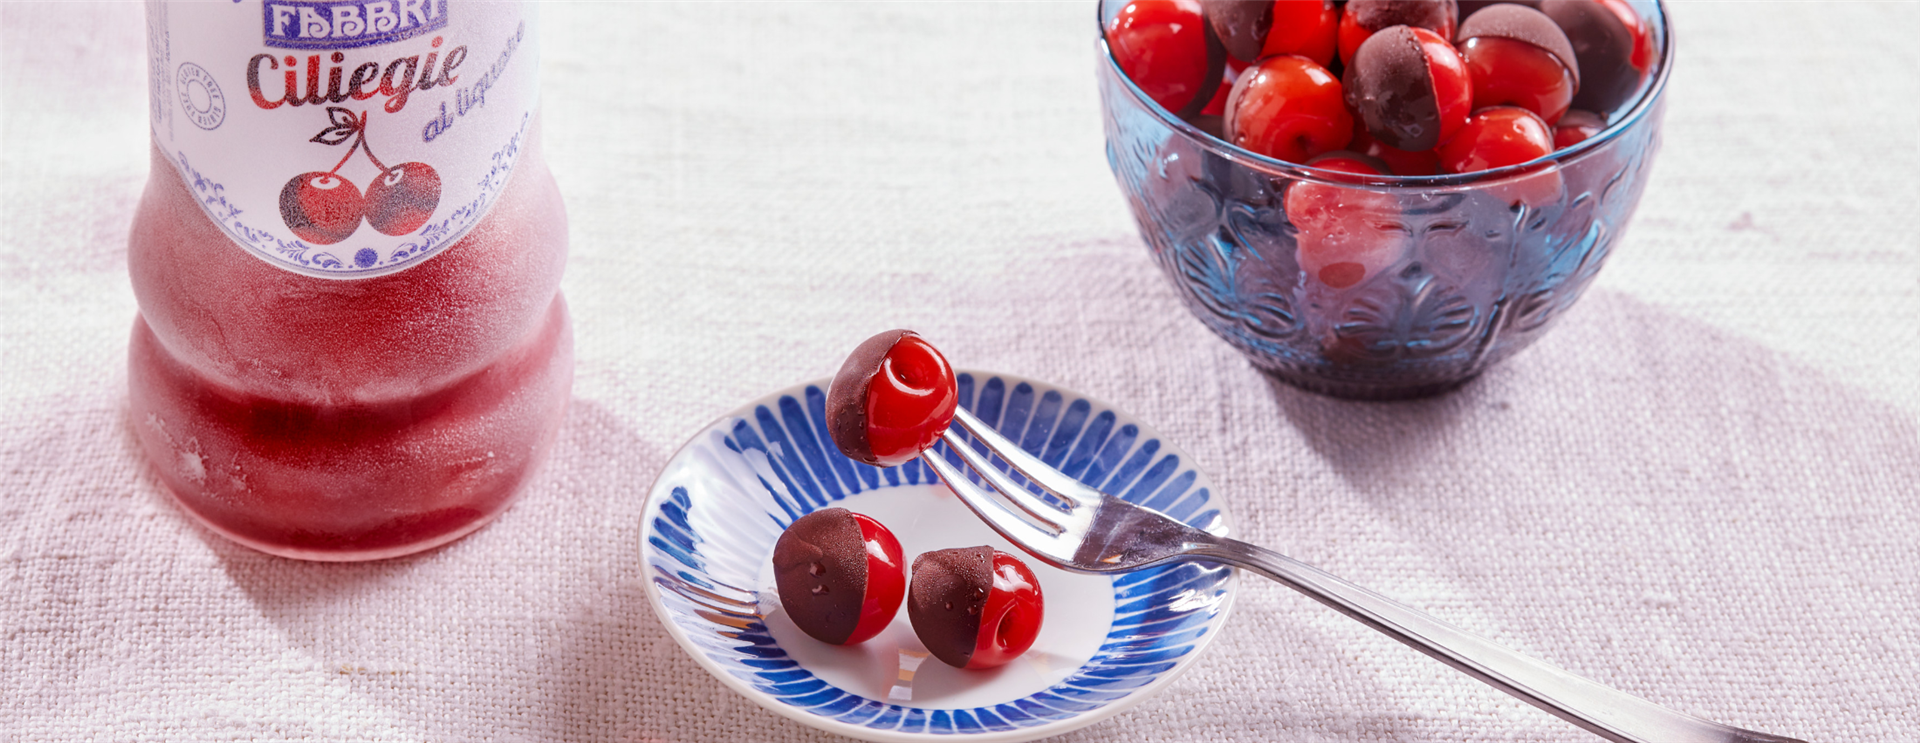 Either great to accompain to a dessert or on their own, even frozen. Unleash your fantasy with Fabbri Liqueur Cherries